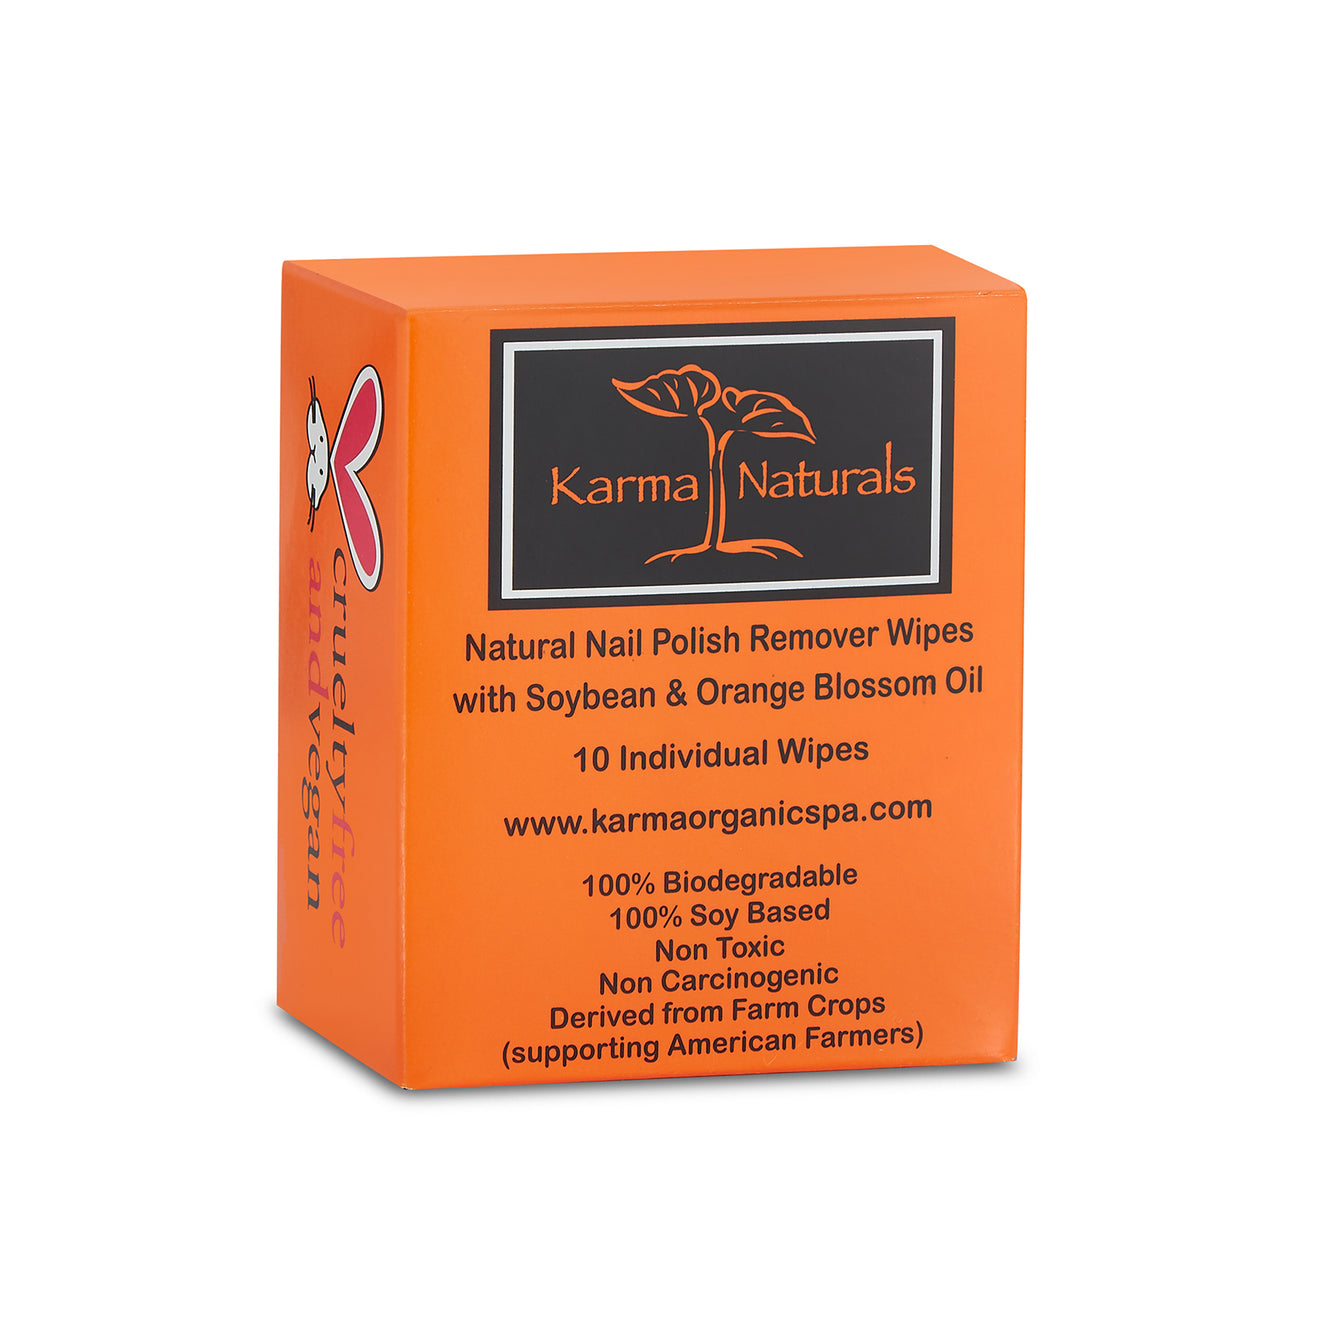 Karma Naturals Nail Polish Remover Wipes with Orange Blossom Oil  - 1 Pack of 10 Individually Wrapped Wipes